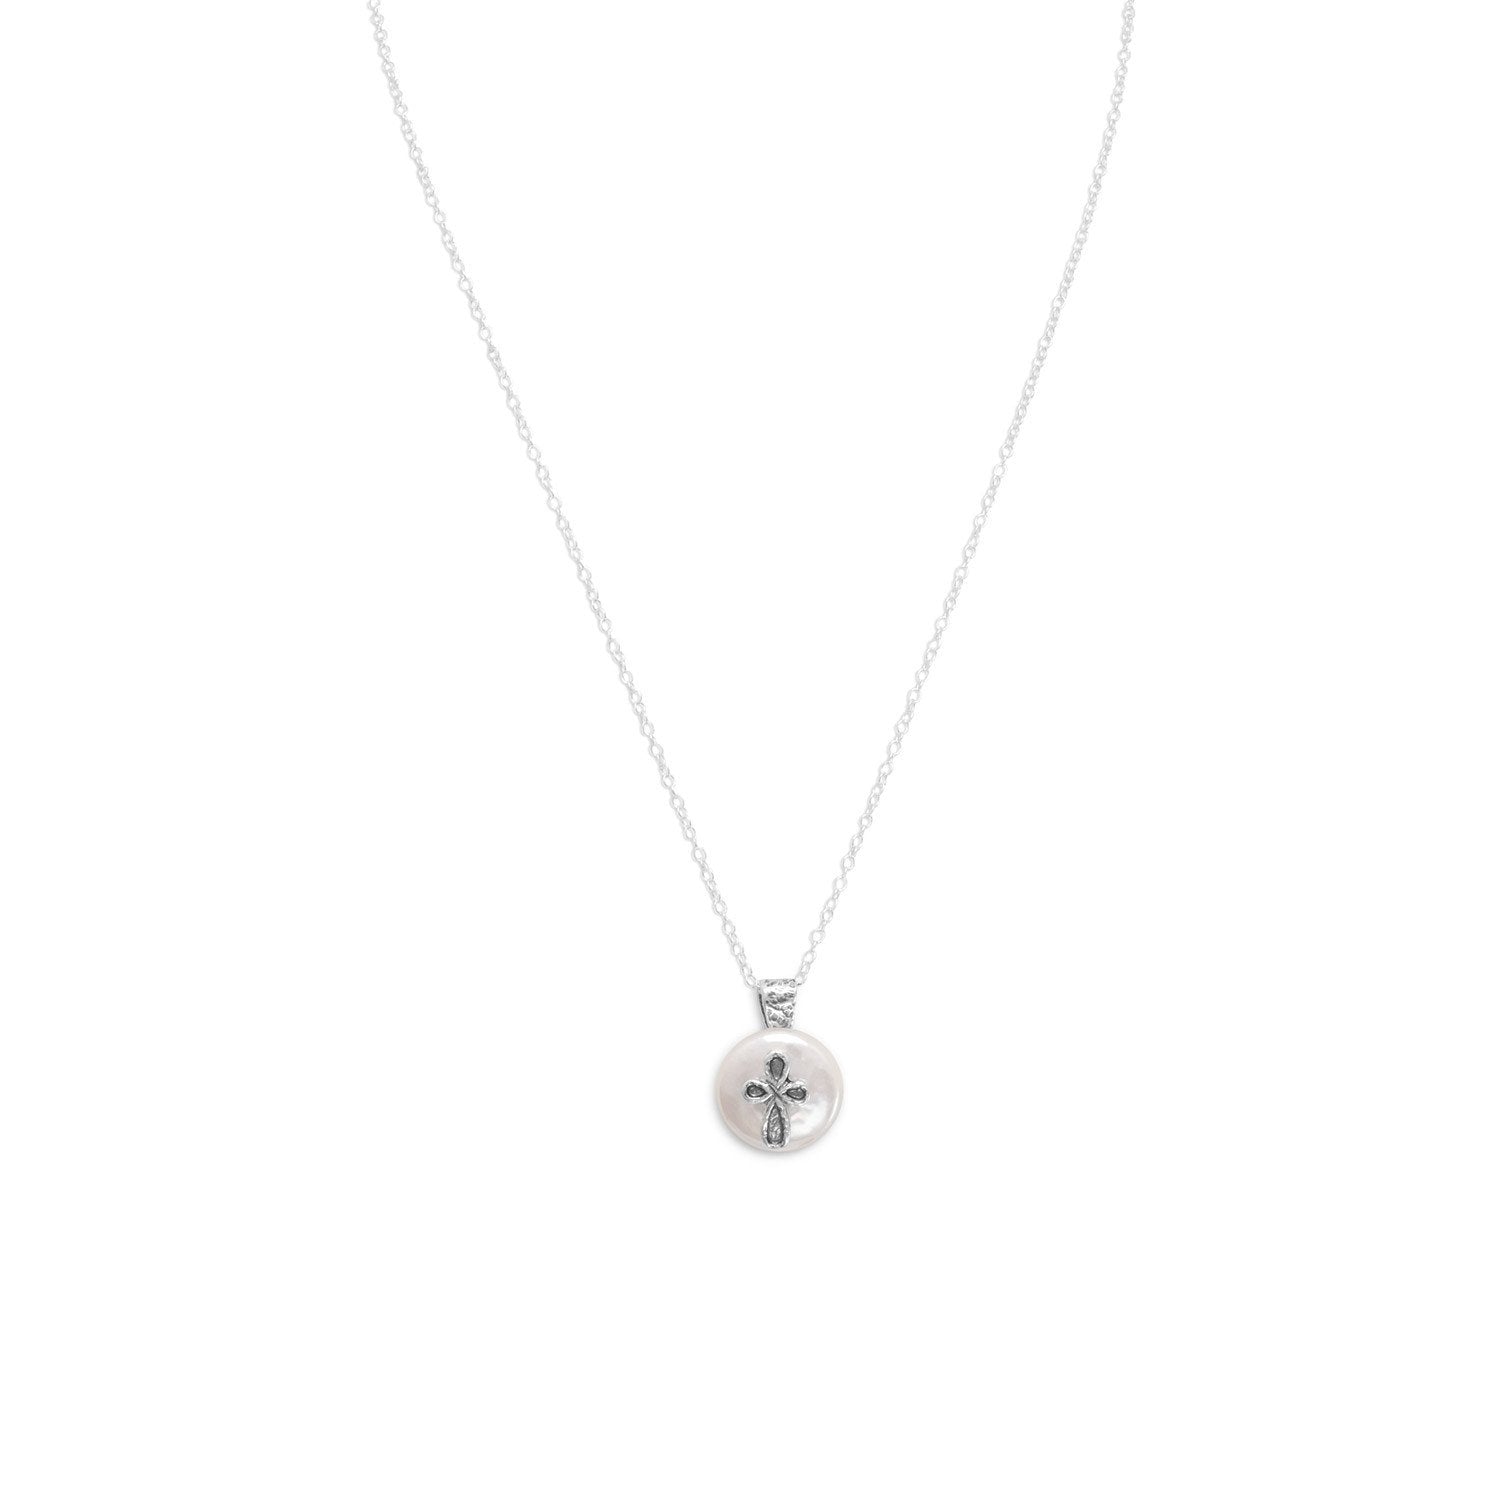 17.5" Cultured Freshwater Pearl with Cross Design Necklace - Joyeria Lady